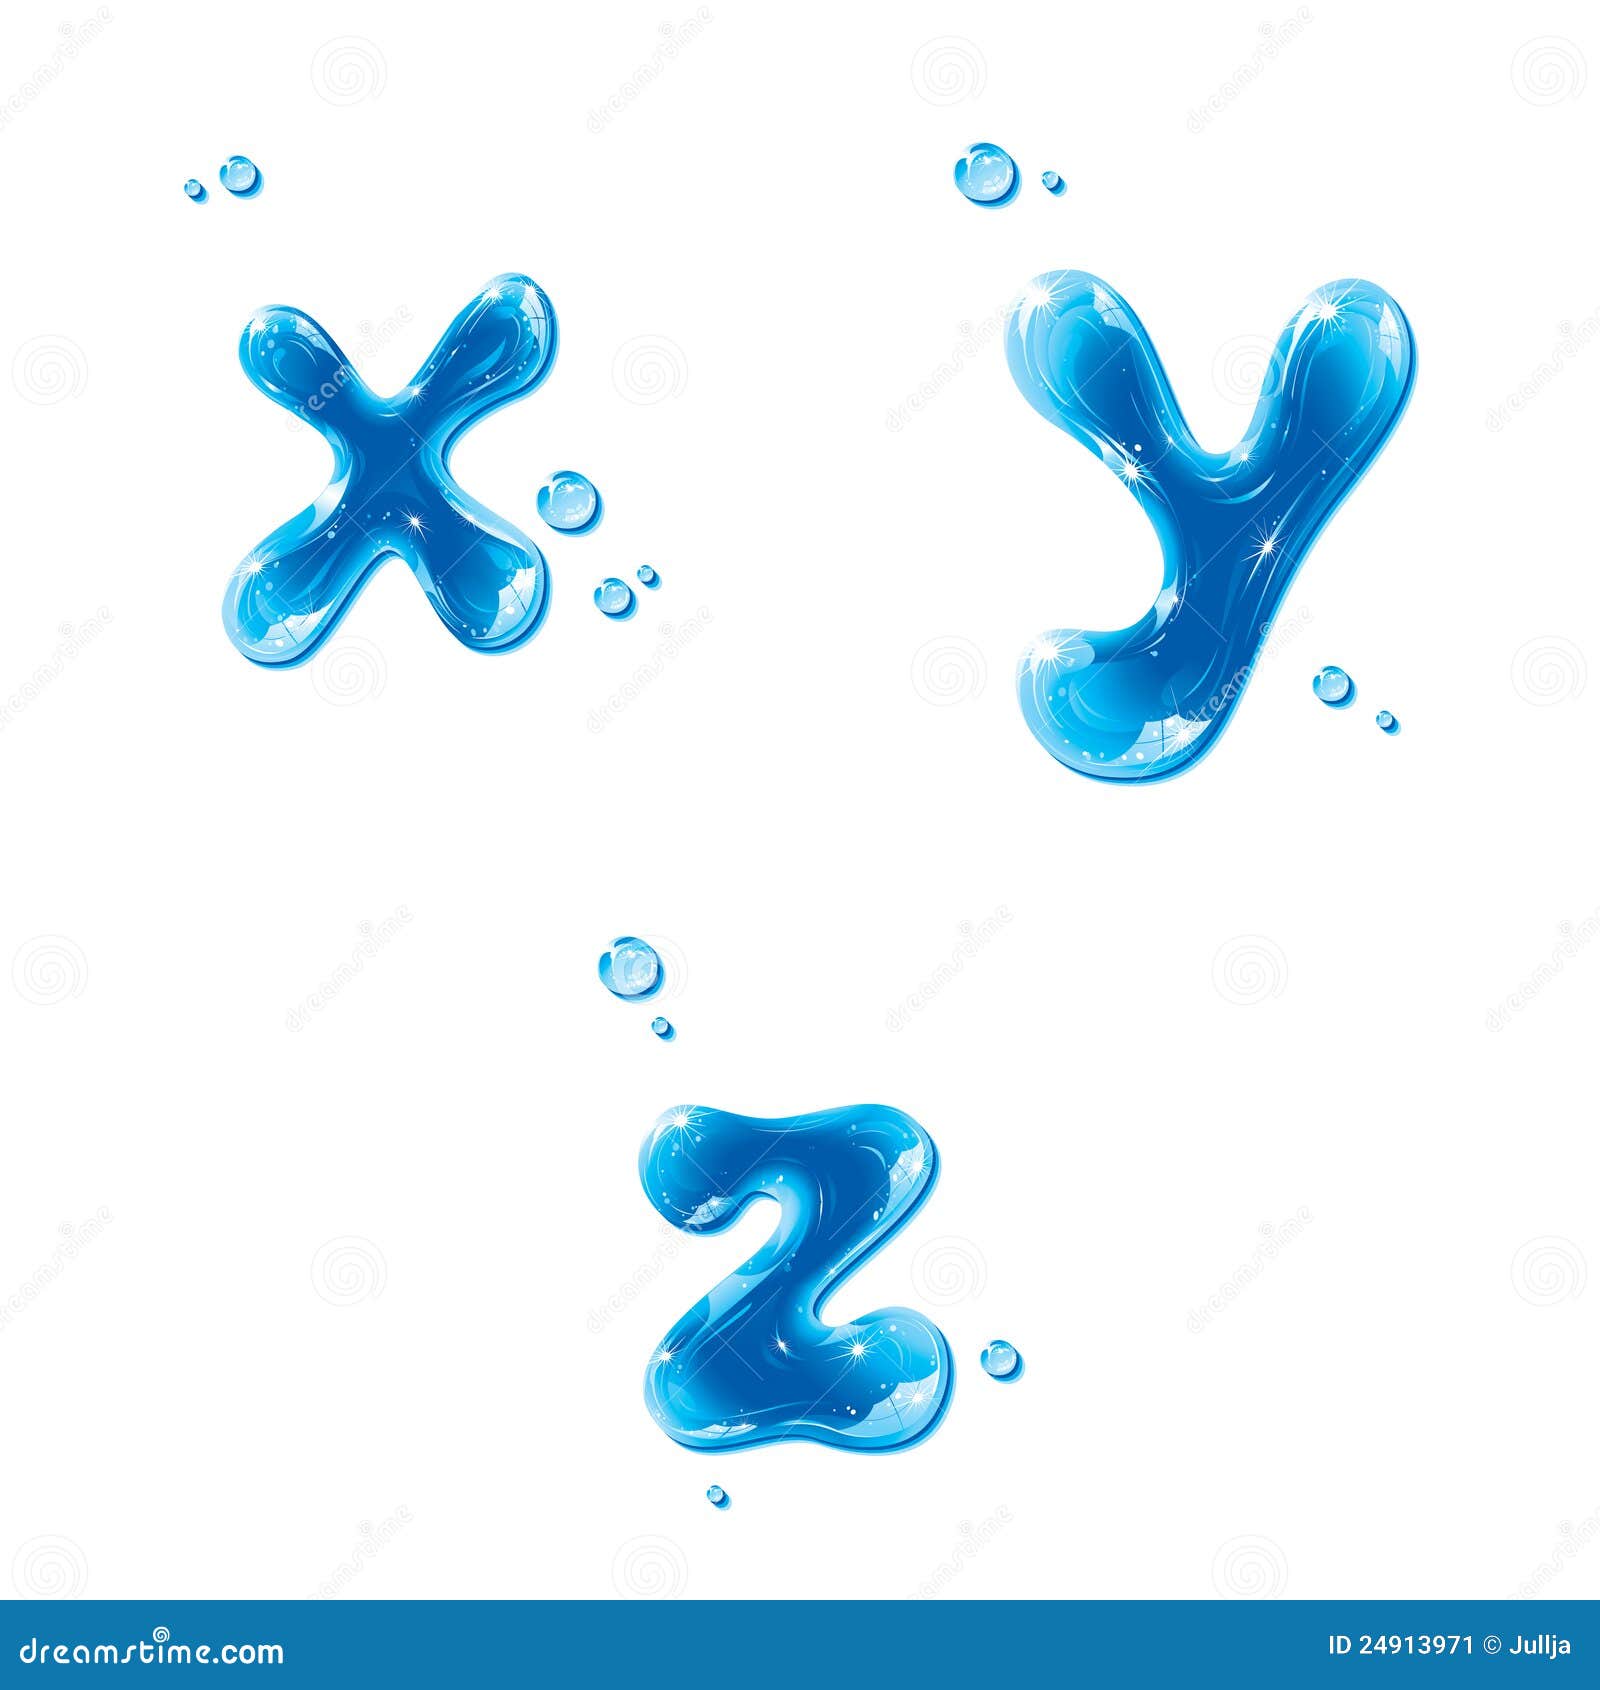 Abc Water Liquid Set Small Letter X Y Z Stock Image Image 24913971